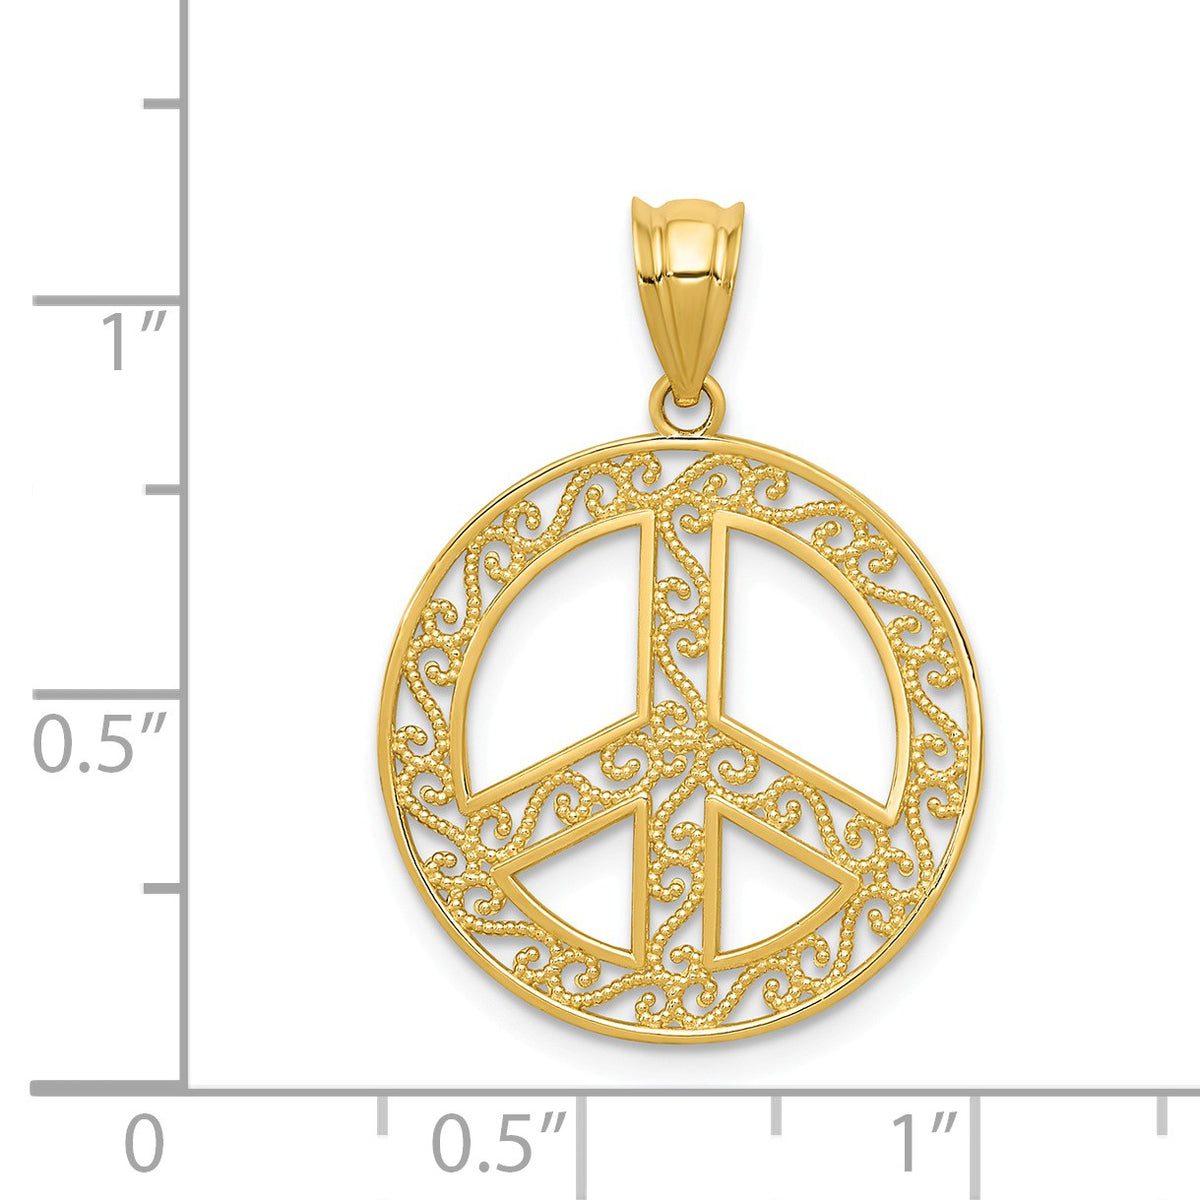 Alternate view of the 14k Yellow Gold Filigree Peace Sign Pendant, 19mm (3/4 inch) by The Black Bow Jewelry Co.